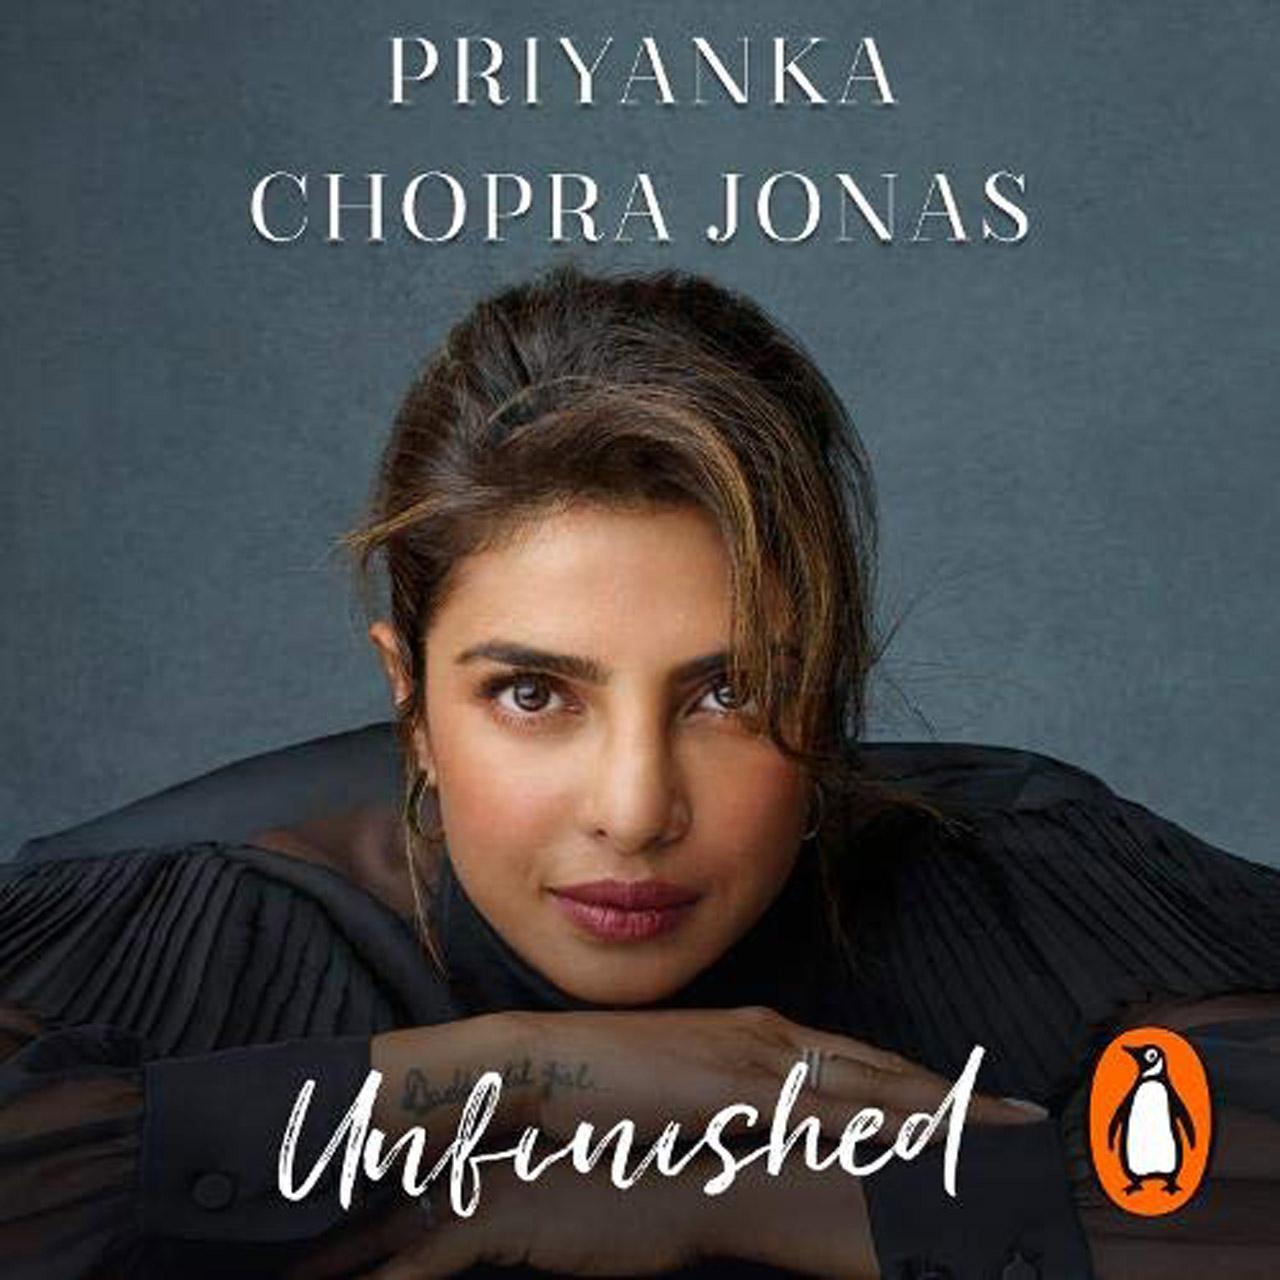 Priyanka Chopra - Unfinished
Priyanka Chopra is one of the world's most recognisable women, renowned for her bold risk-taking, multiculturalism and activism. Unfinished talks about everything from her 20-year-long career as an actor and producer, spread across two continents, to her work as a UNICEF Goodwill ambassador. From losing her beloved father to cancer to marrying Nick Jonas, Priyanka Chopra Jonas opens up and shares her story to inspire a generation of young girls around the world to gather their courage, embrace their ambition and commit to the hard work of following their dreams.